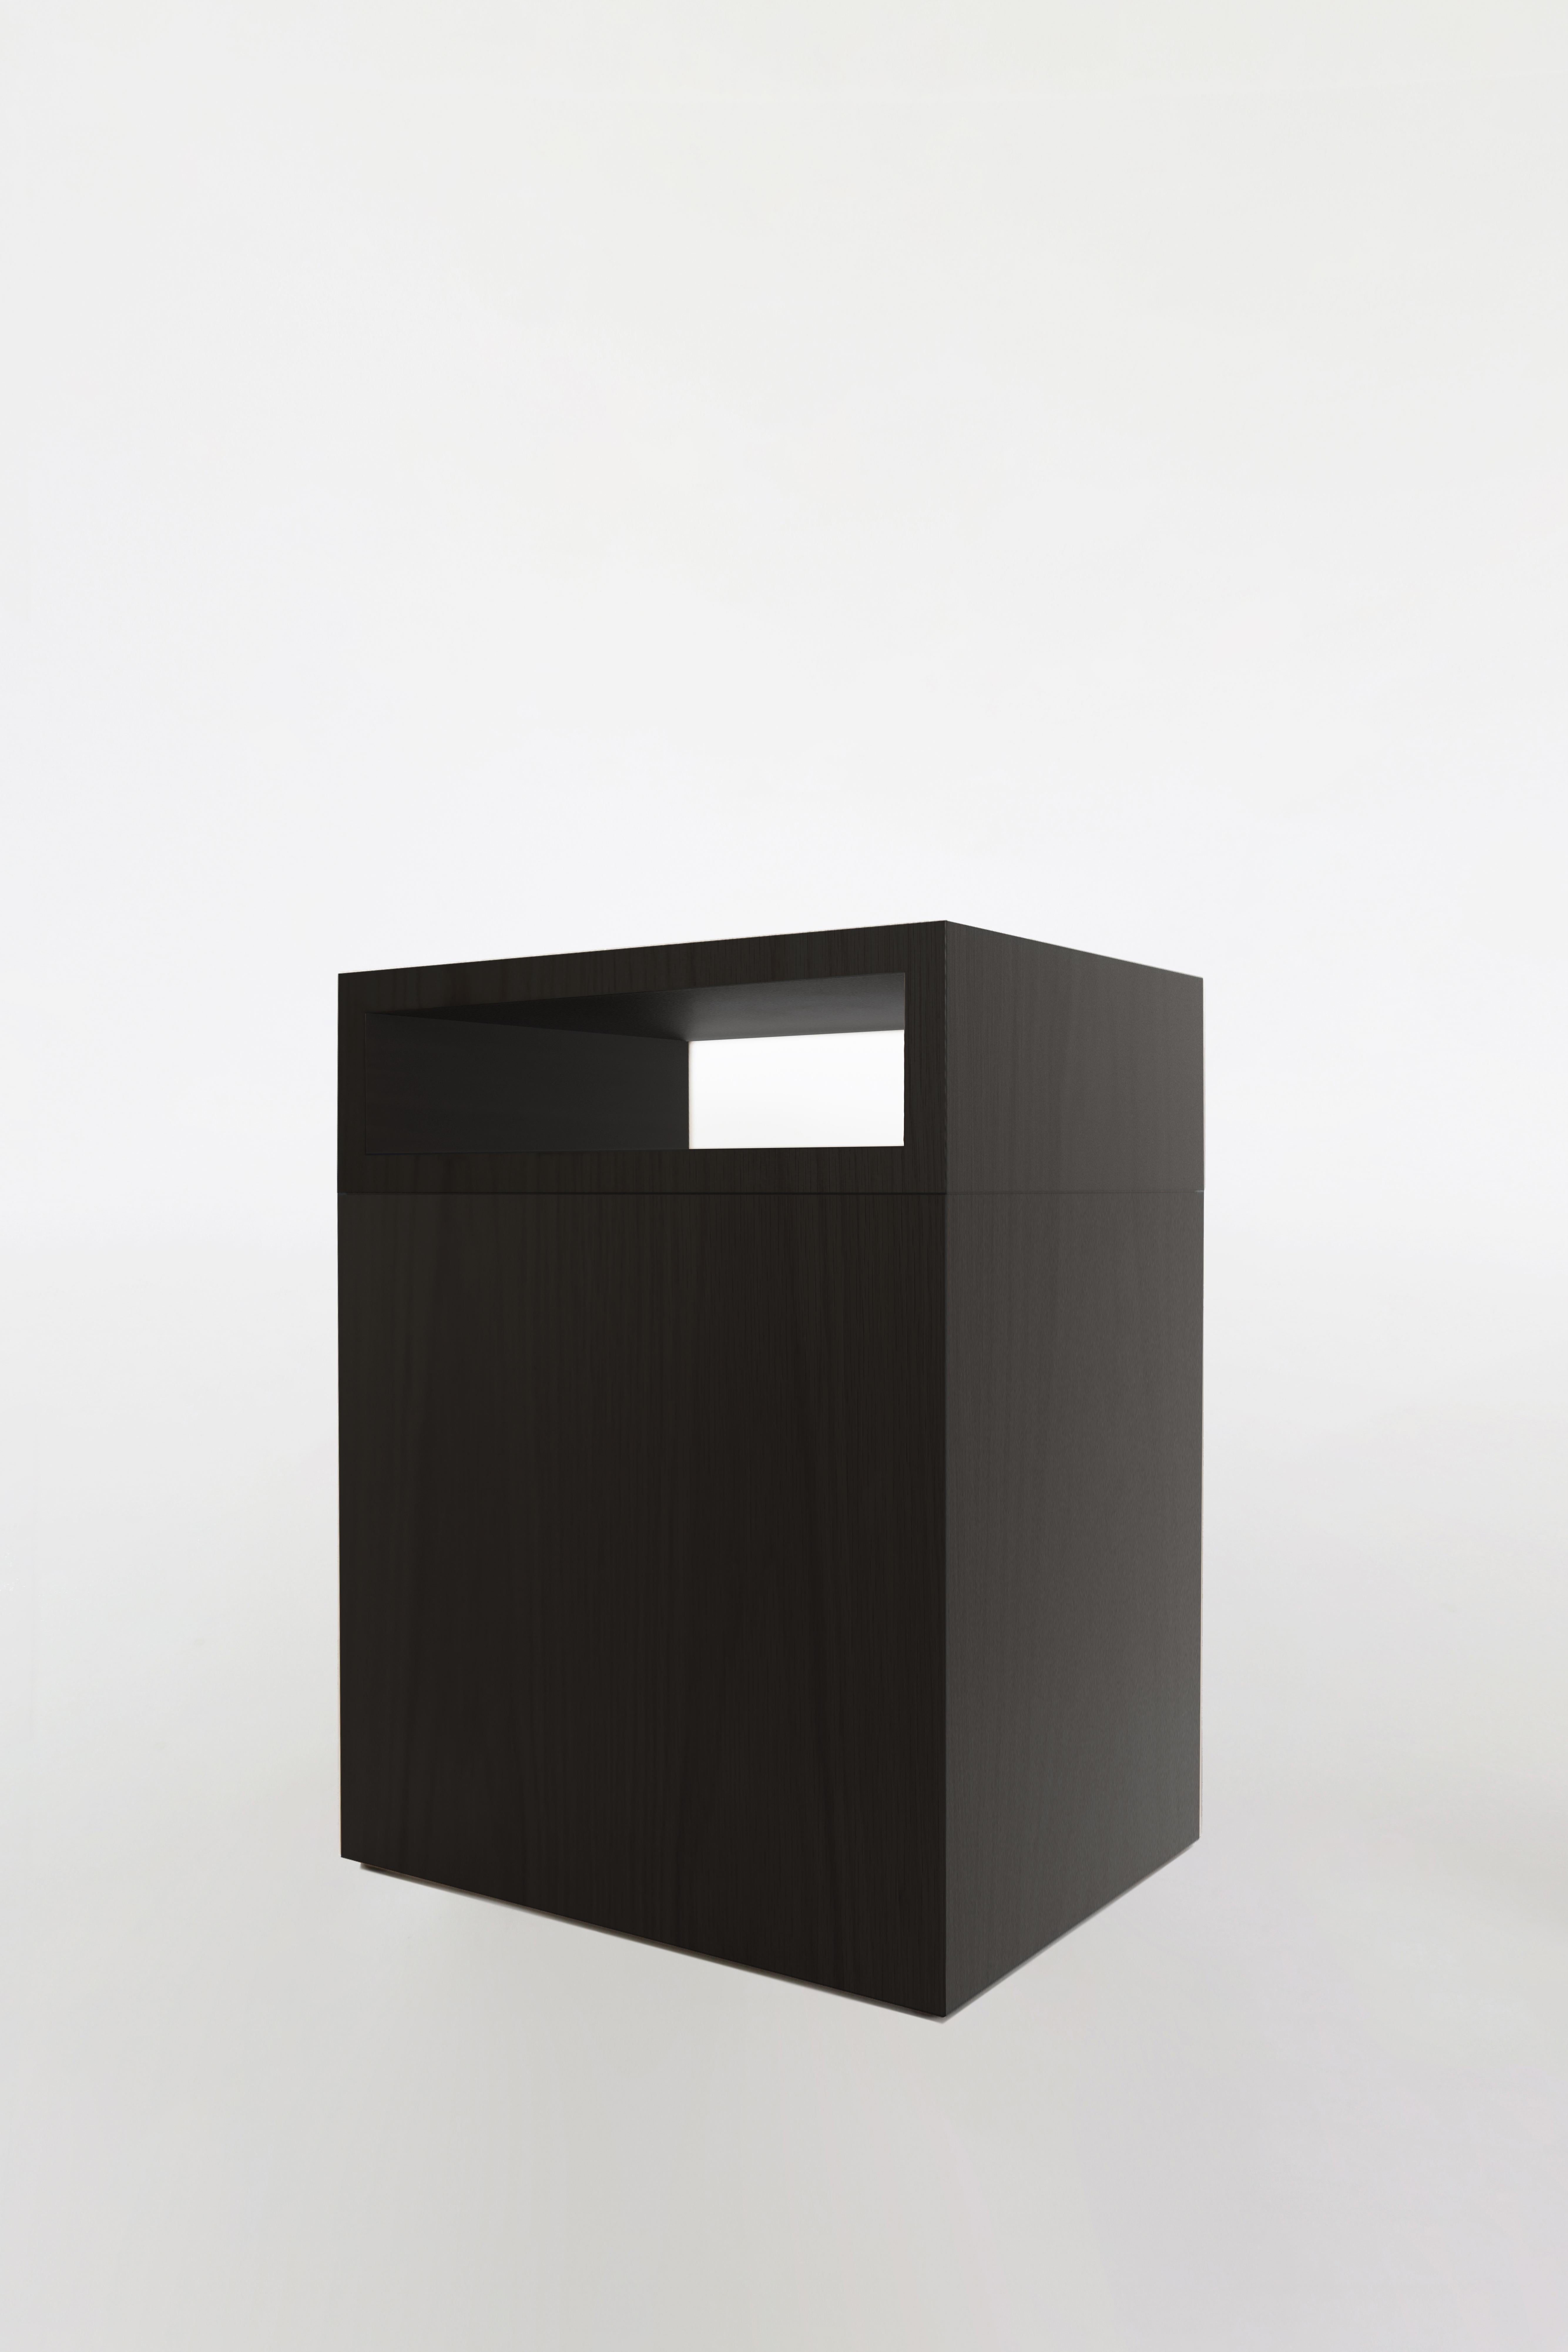 Orphan work 101 Side Table
Shown in black.
Available painted.
Measures: 13” W x 10.25” D x 17” H

Orphan work is designed to complement in the heart of Soho, New York City. Each piece is handmade in New York and Los Angeles by traditional artisans.